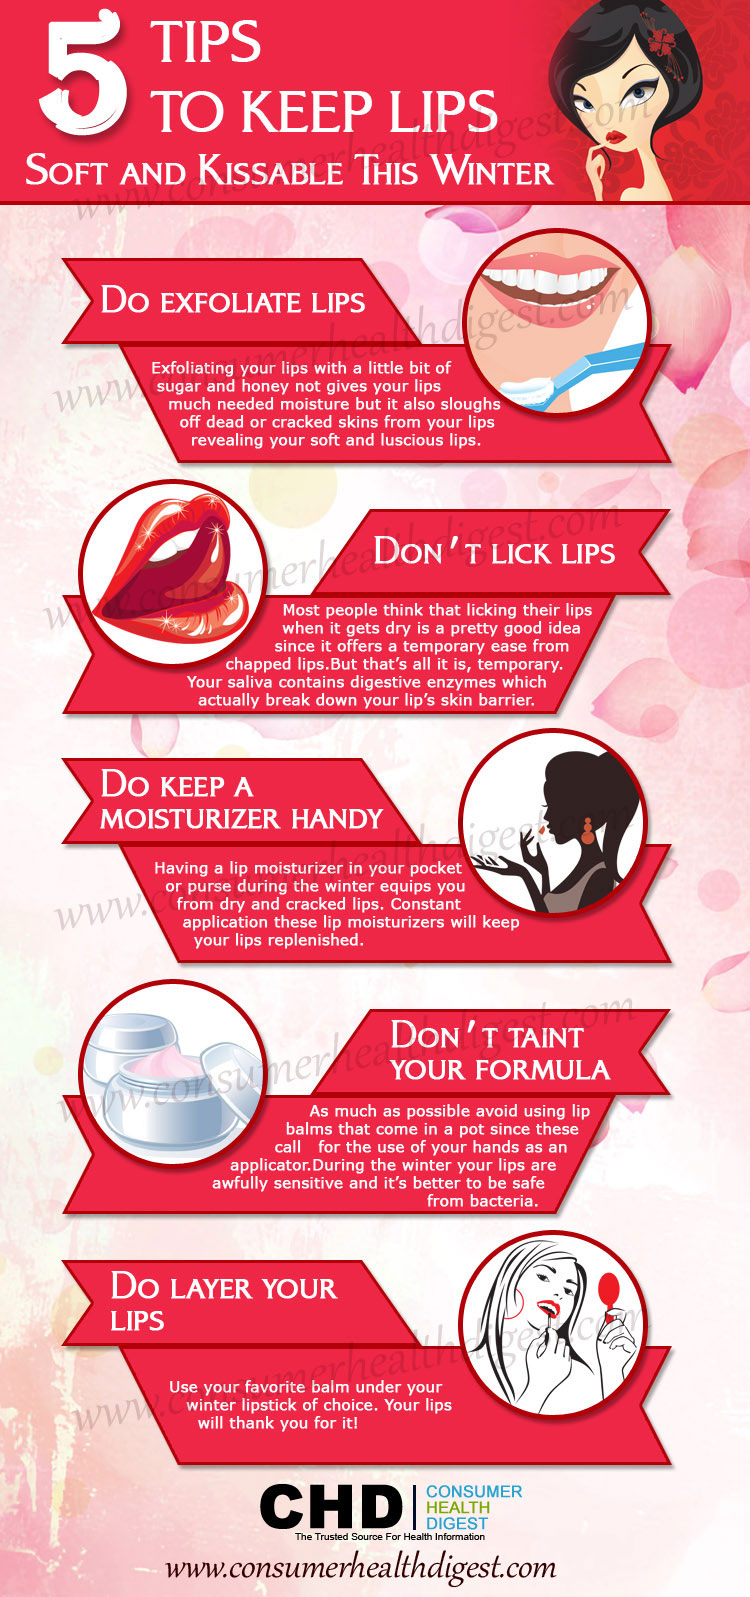 5 Tips to Keep Lips Soft and Kissable This Winter